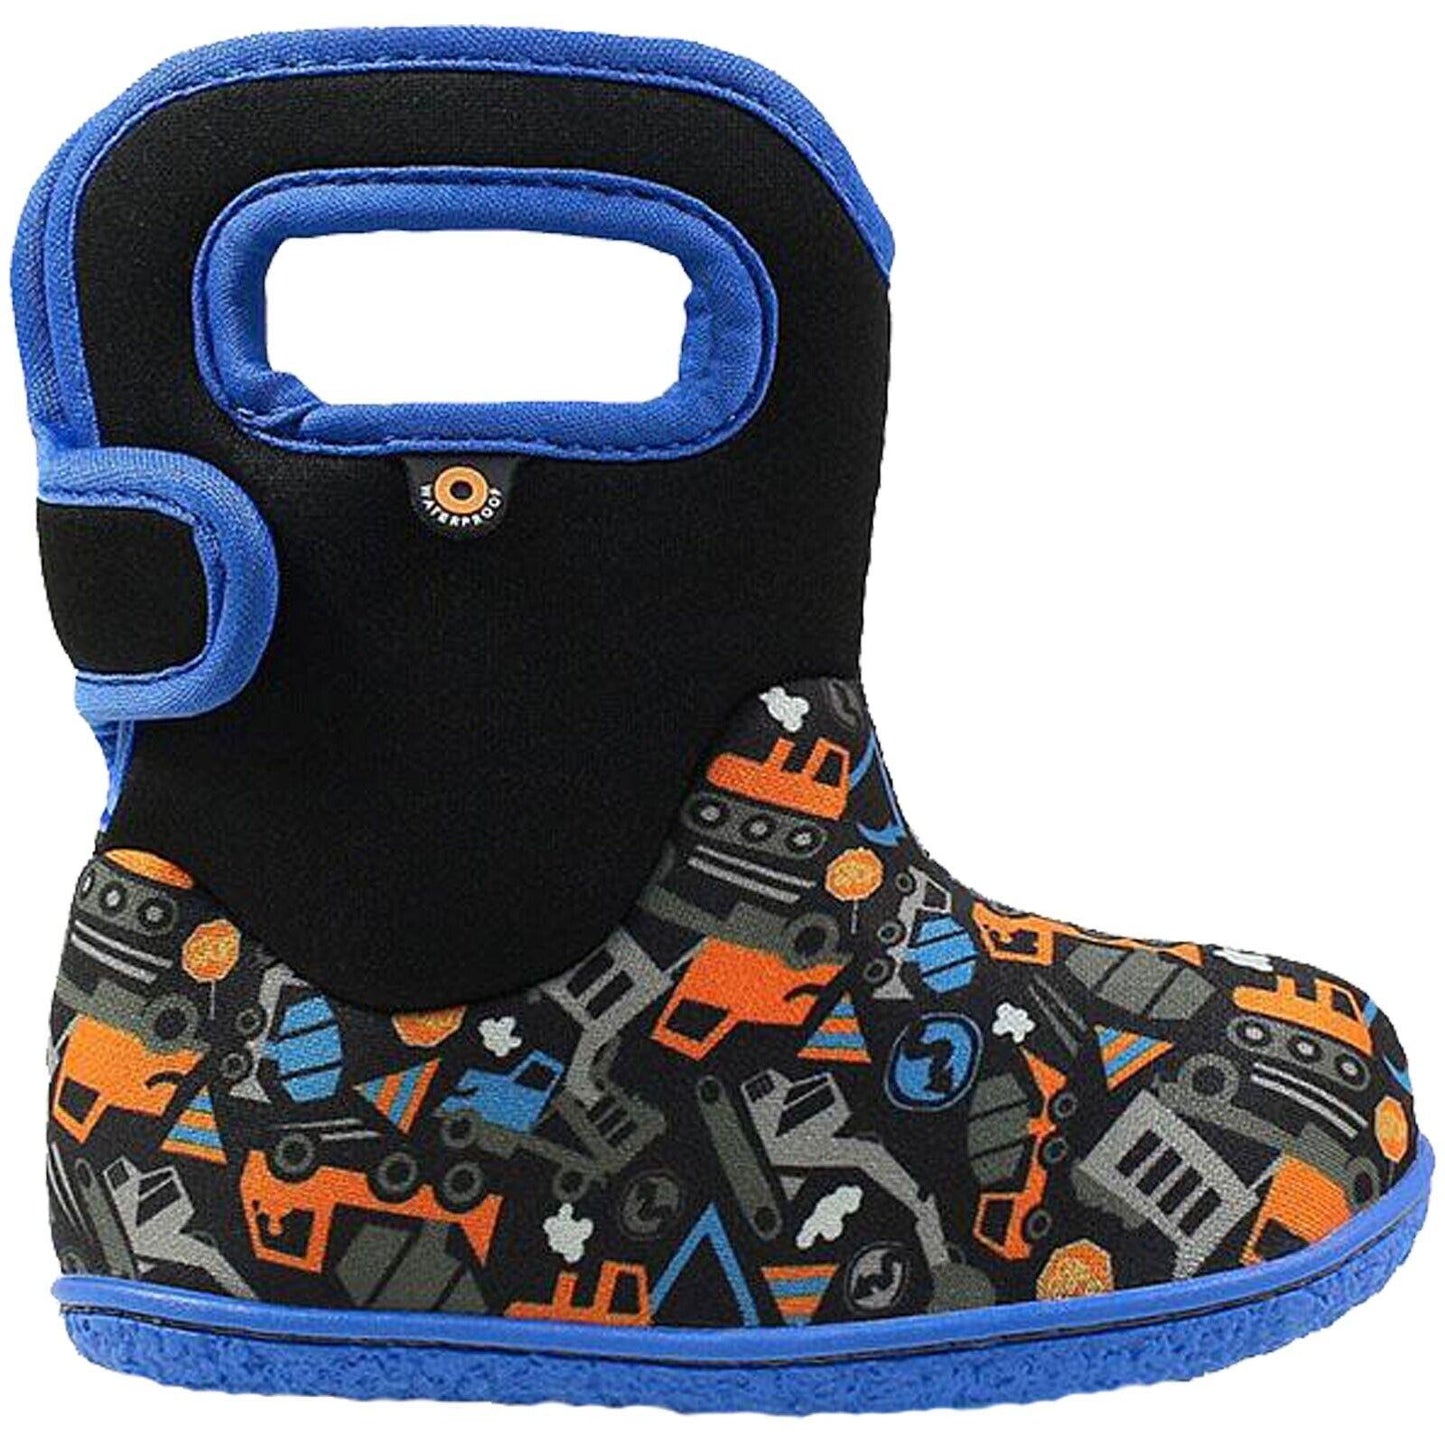 Boys Baby Bogs Construction Black Multi Washable Warm Wellies Boots 724621